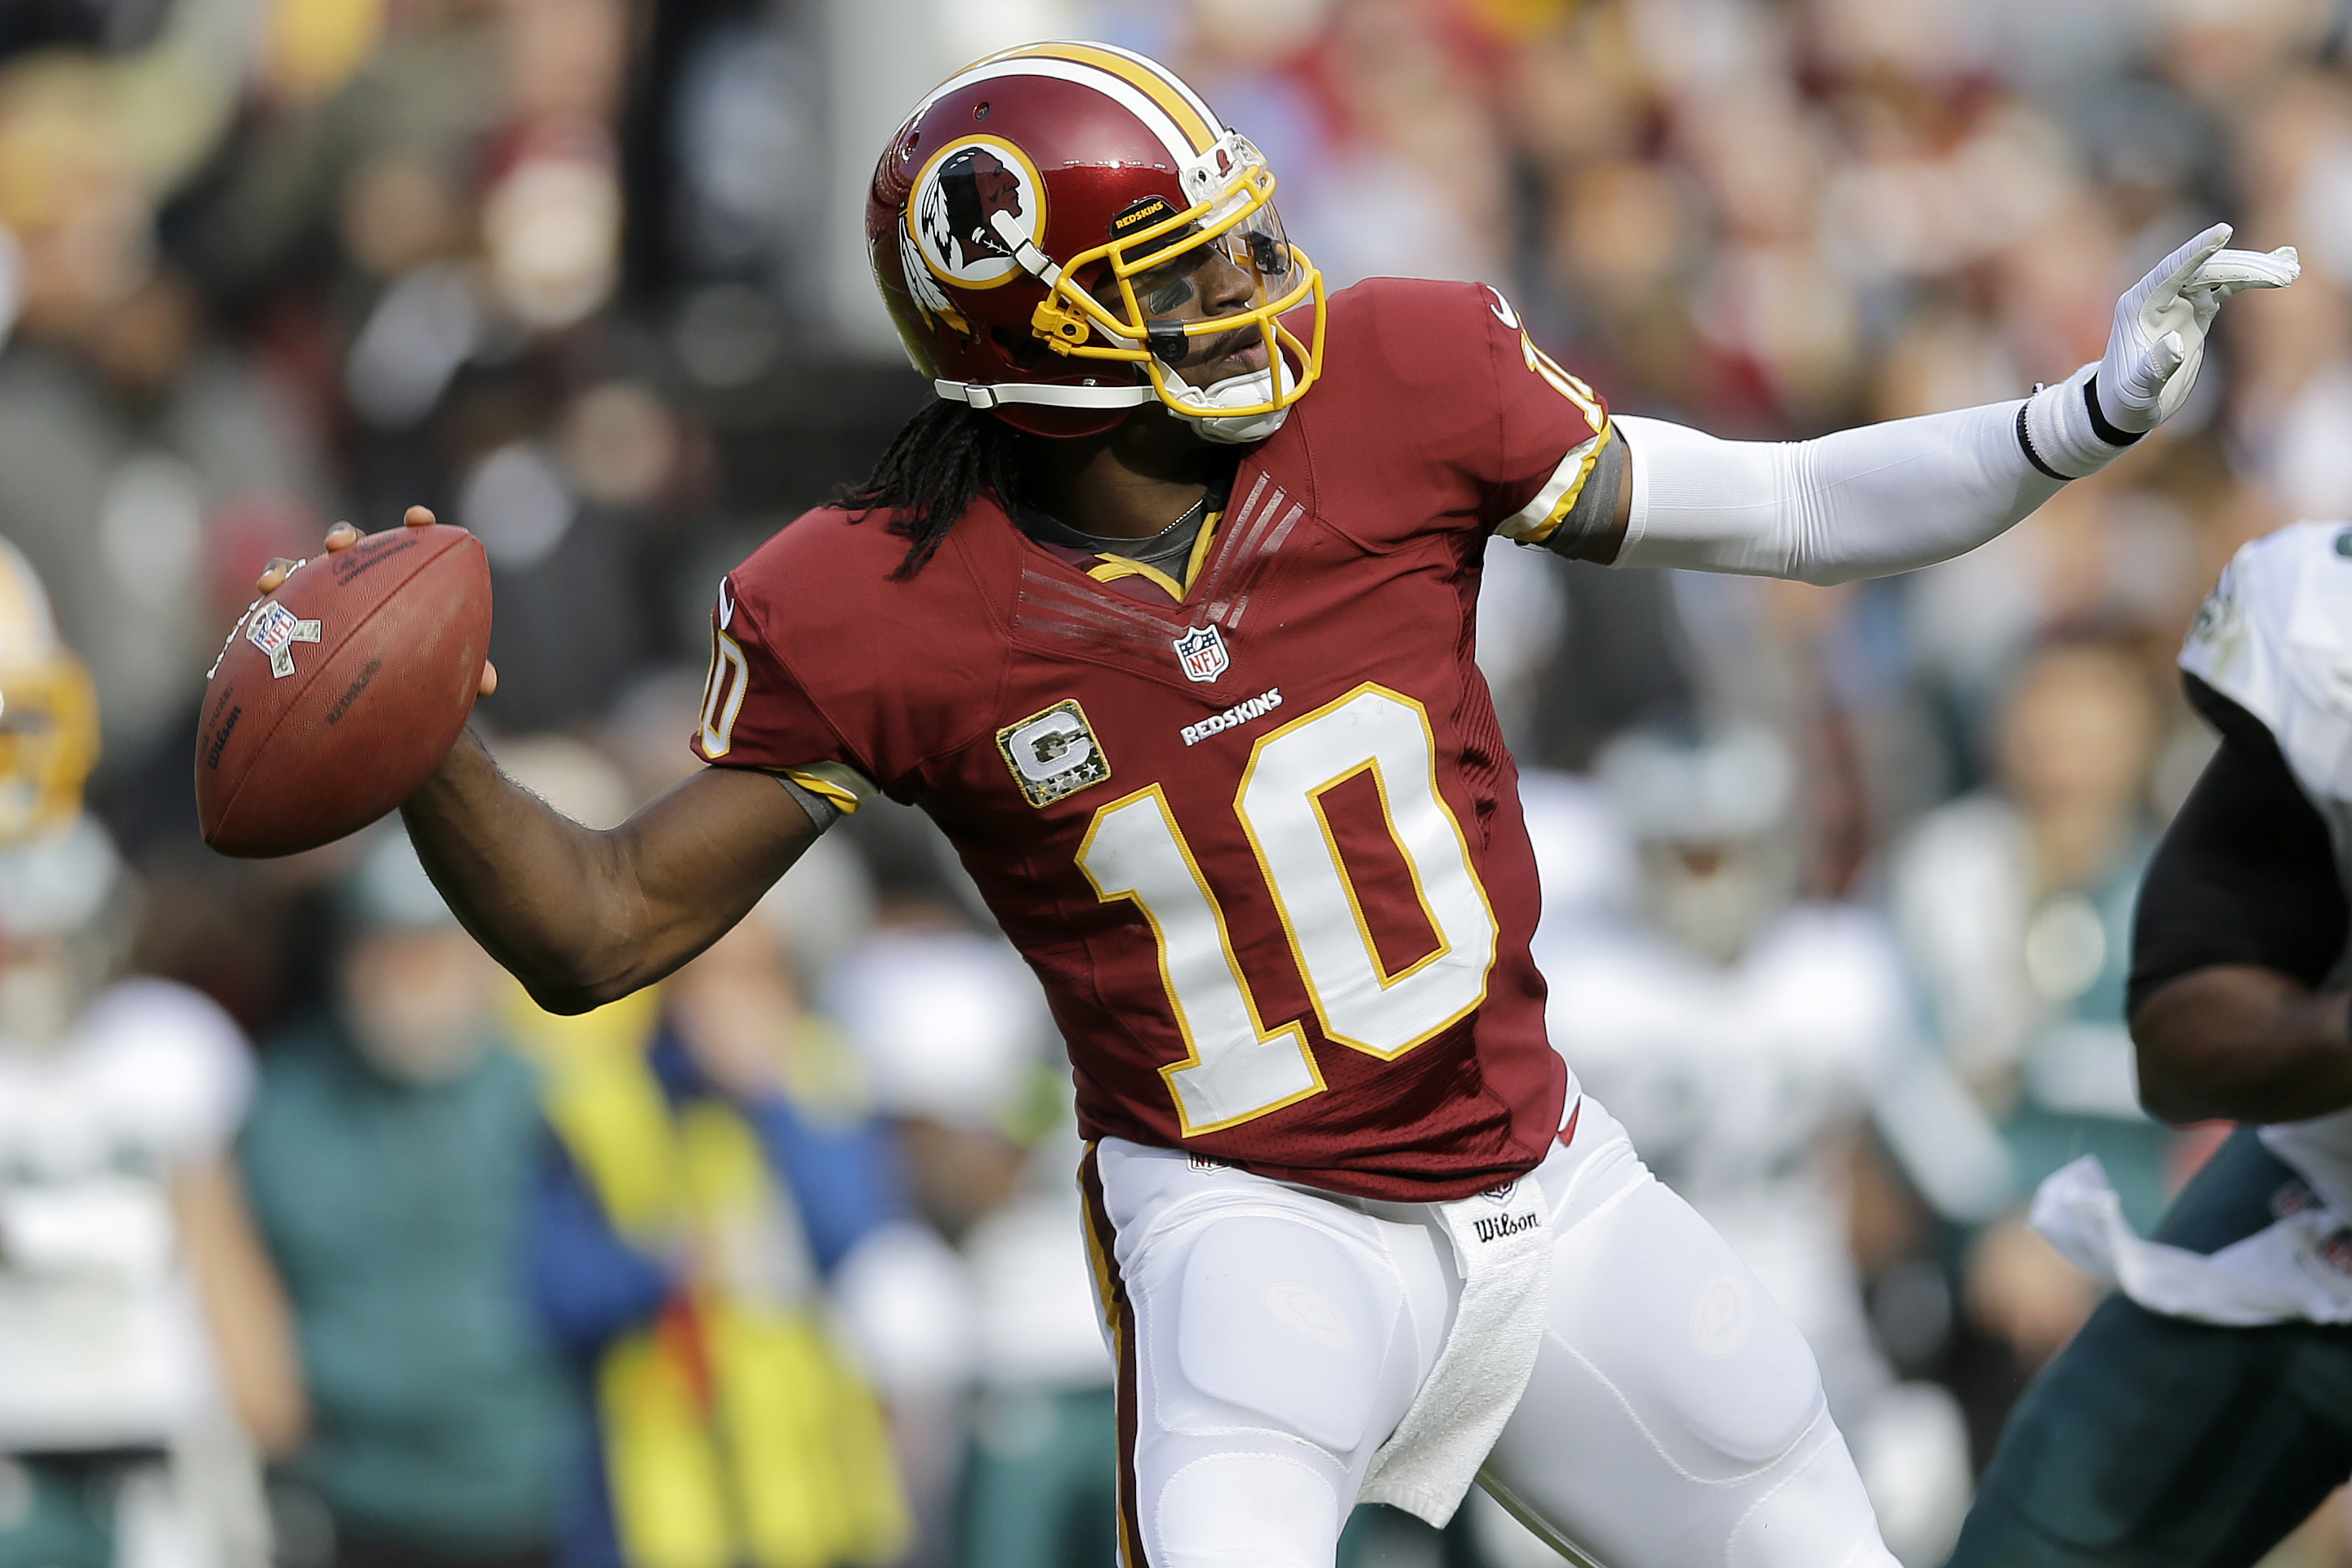 RG3 NFL Career on Life Support, Tristan Thompson is a Dad + Mike Evans IR